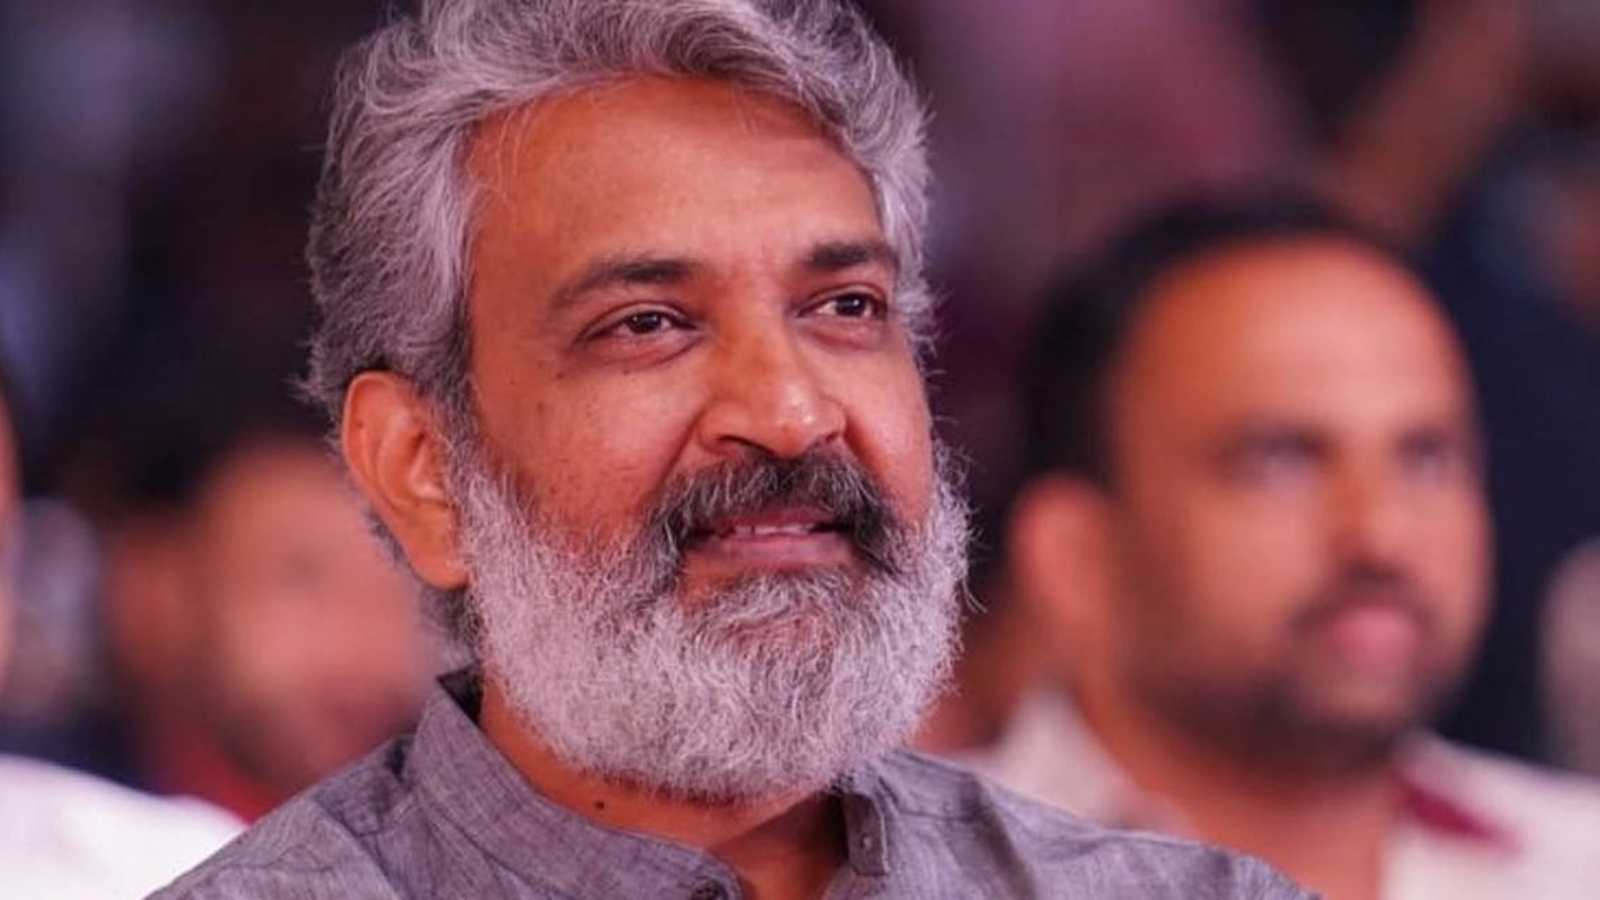 S.S. Rajamouli's odds of sweeping the Oscars with RRR go up greatly after winning NYFCC Best Director points out Adivi Sesh